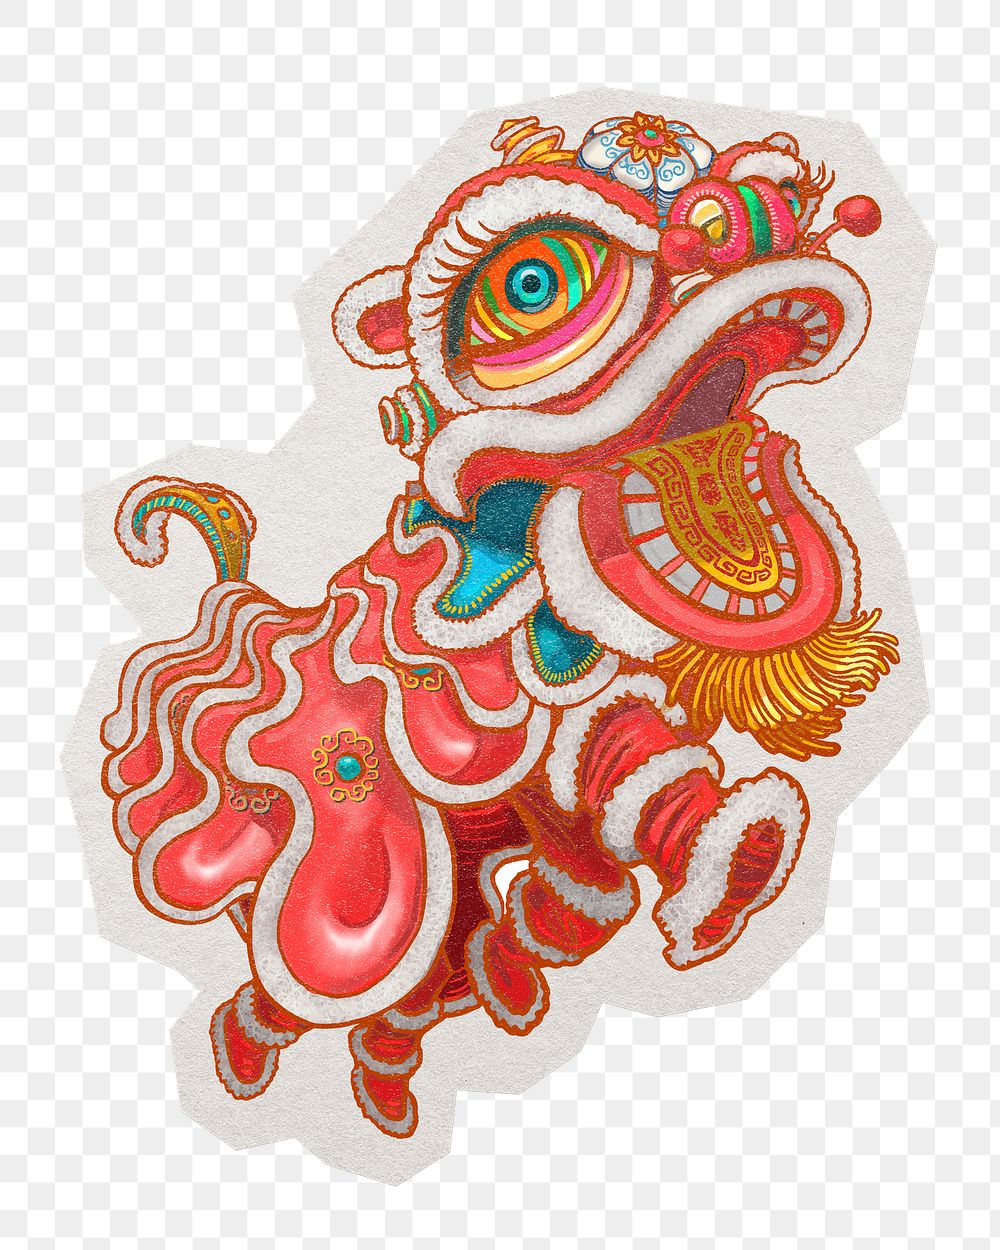 Chinese dragon png sticker, paper cut on transparent background